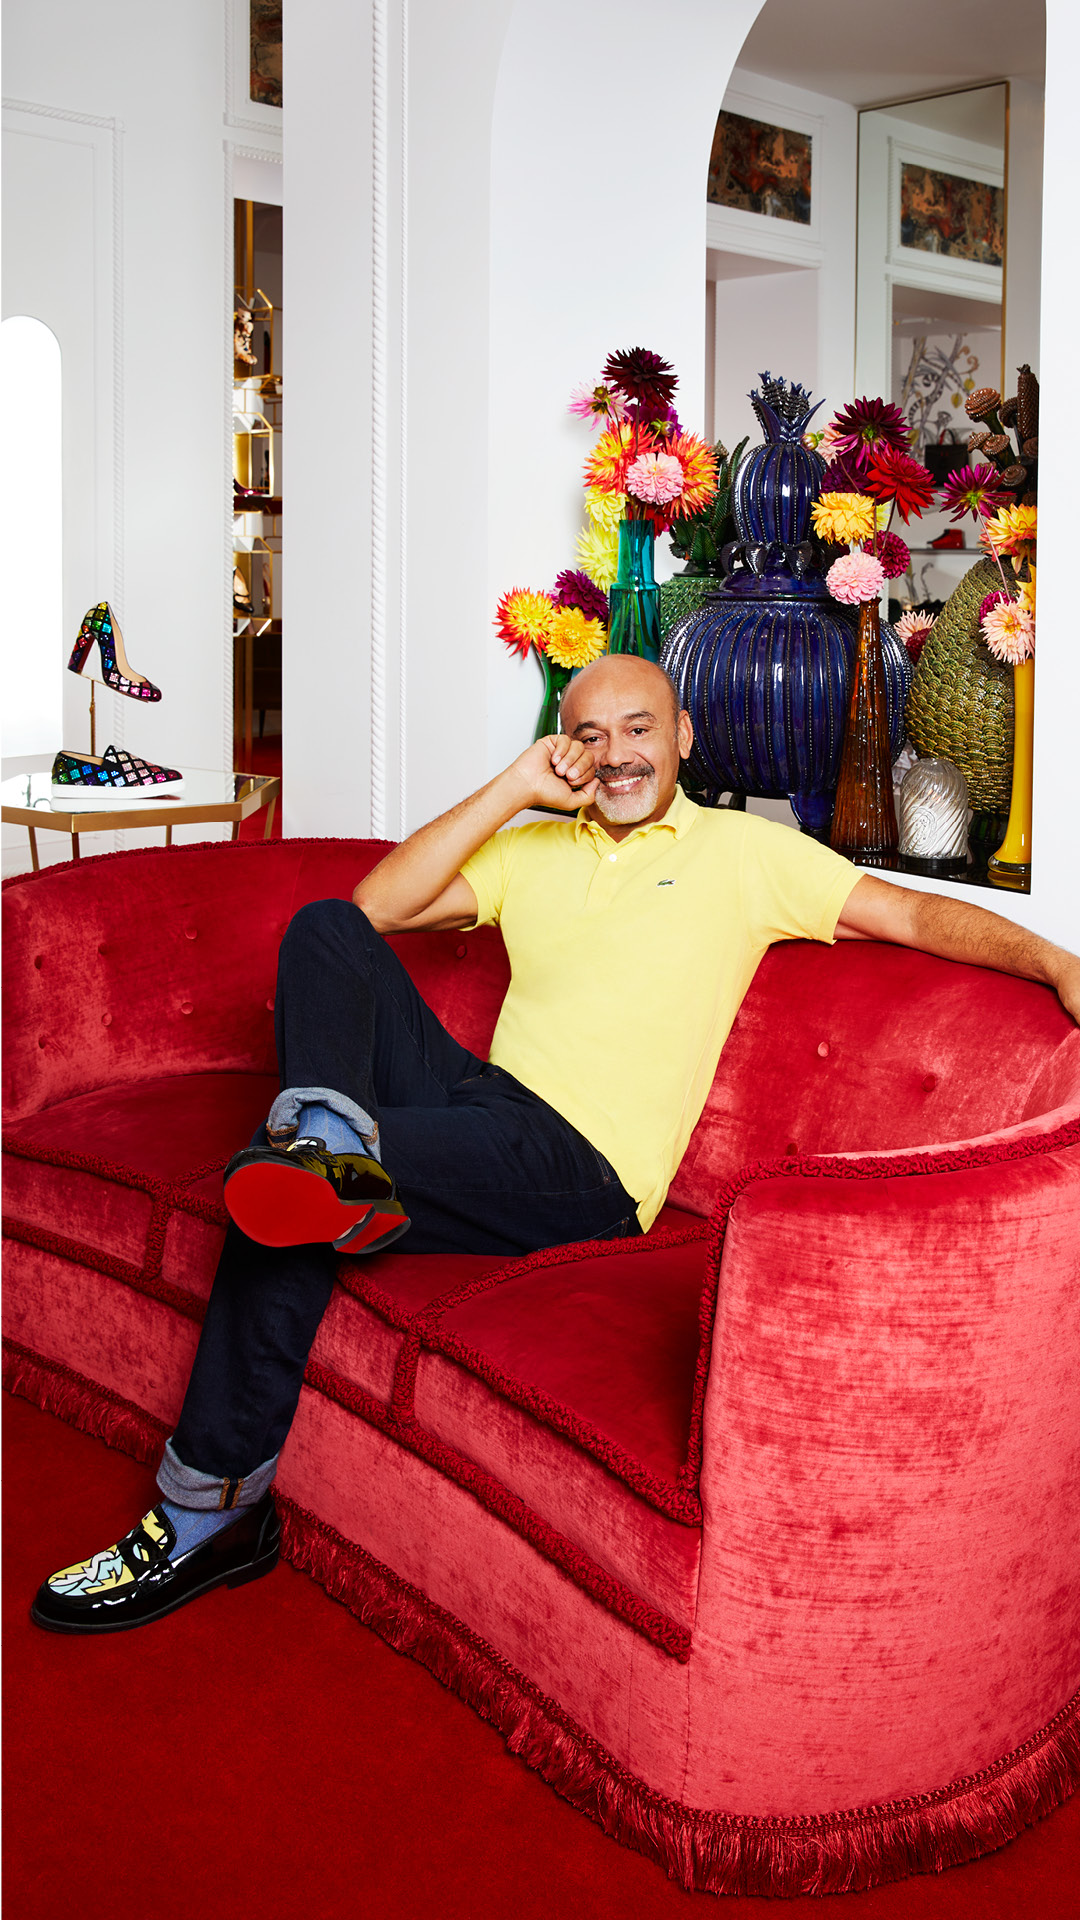 Christian Louboutin shares his cultural picks from books to music